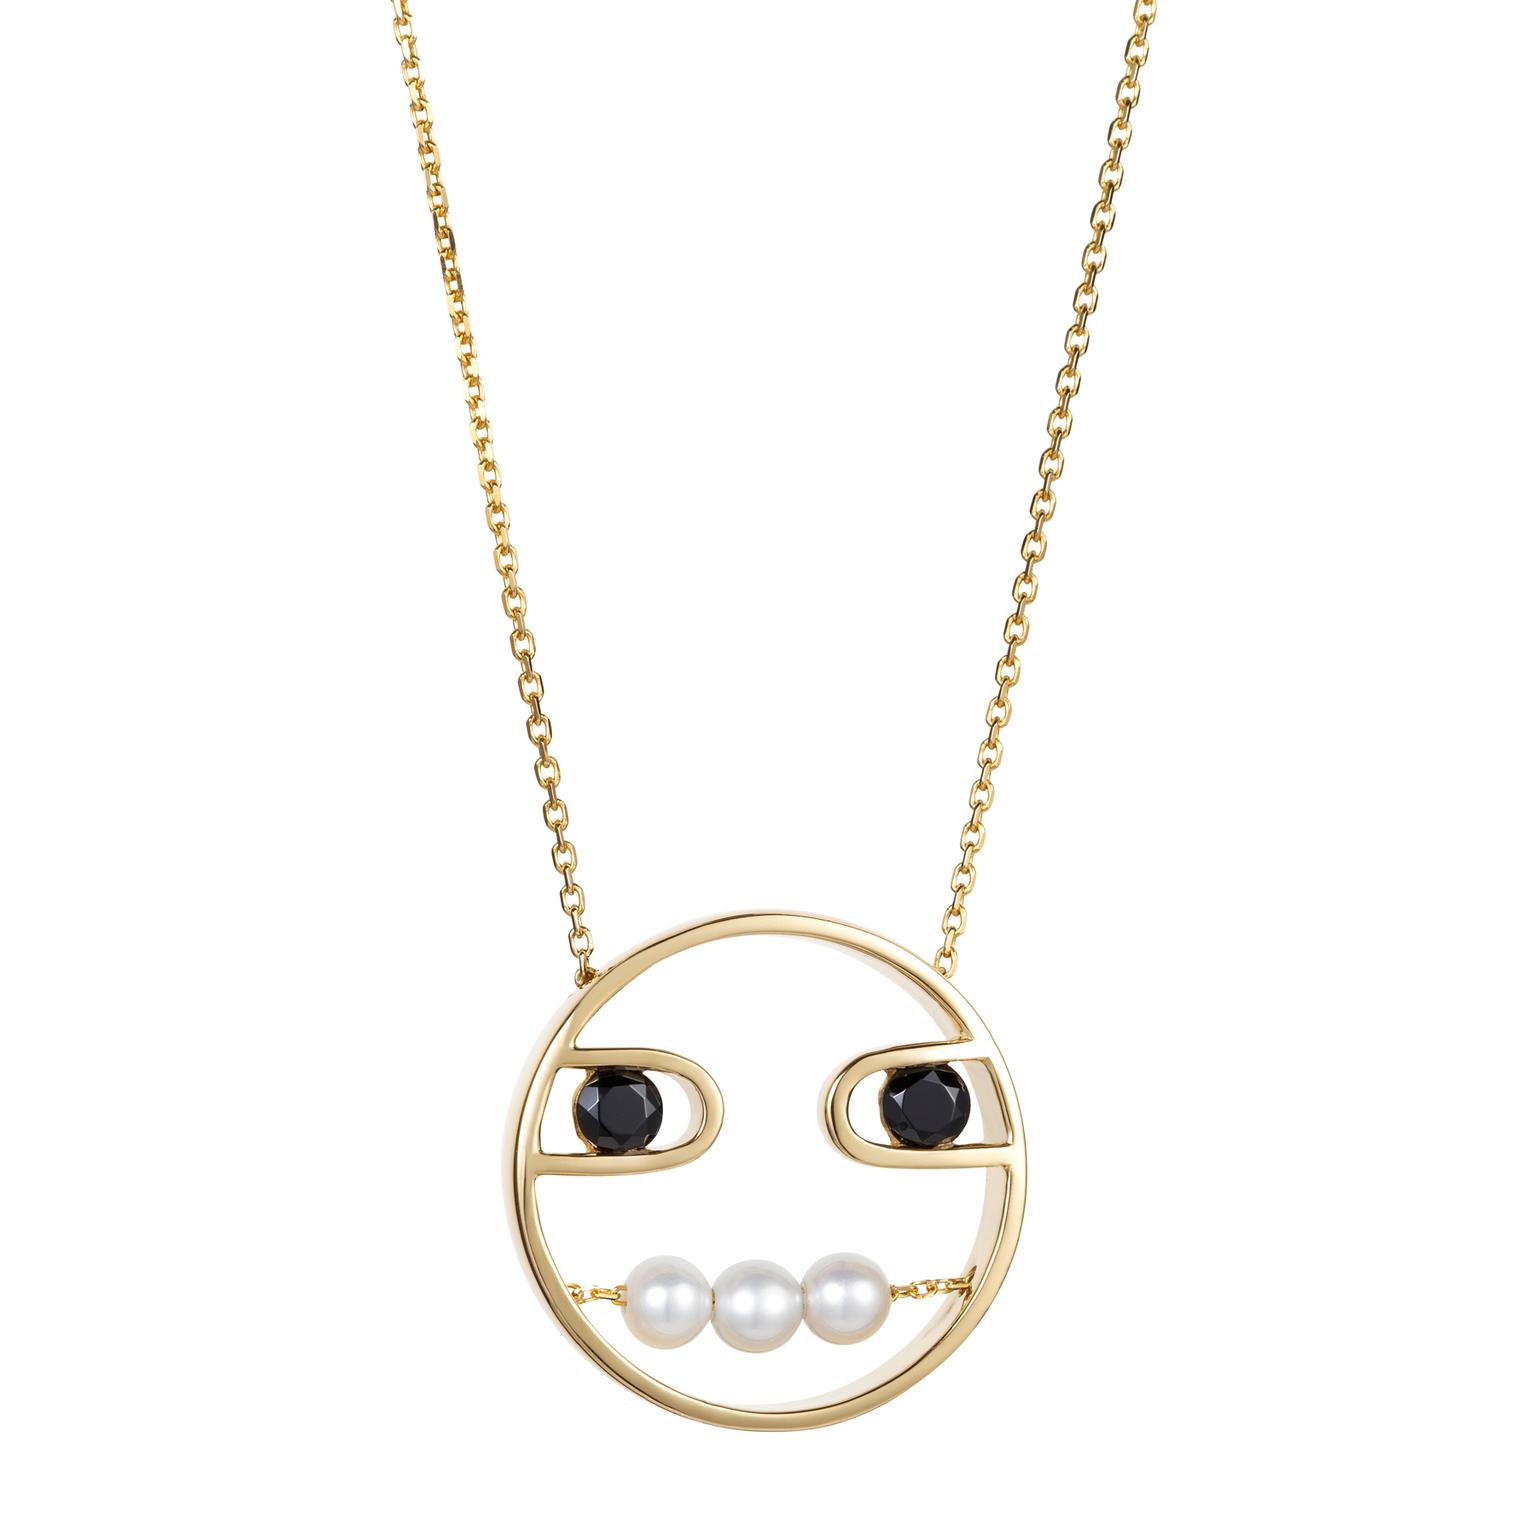 Ruifier Paola emoticon pearl spinel pendant